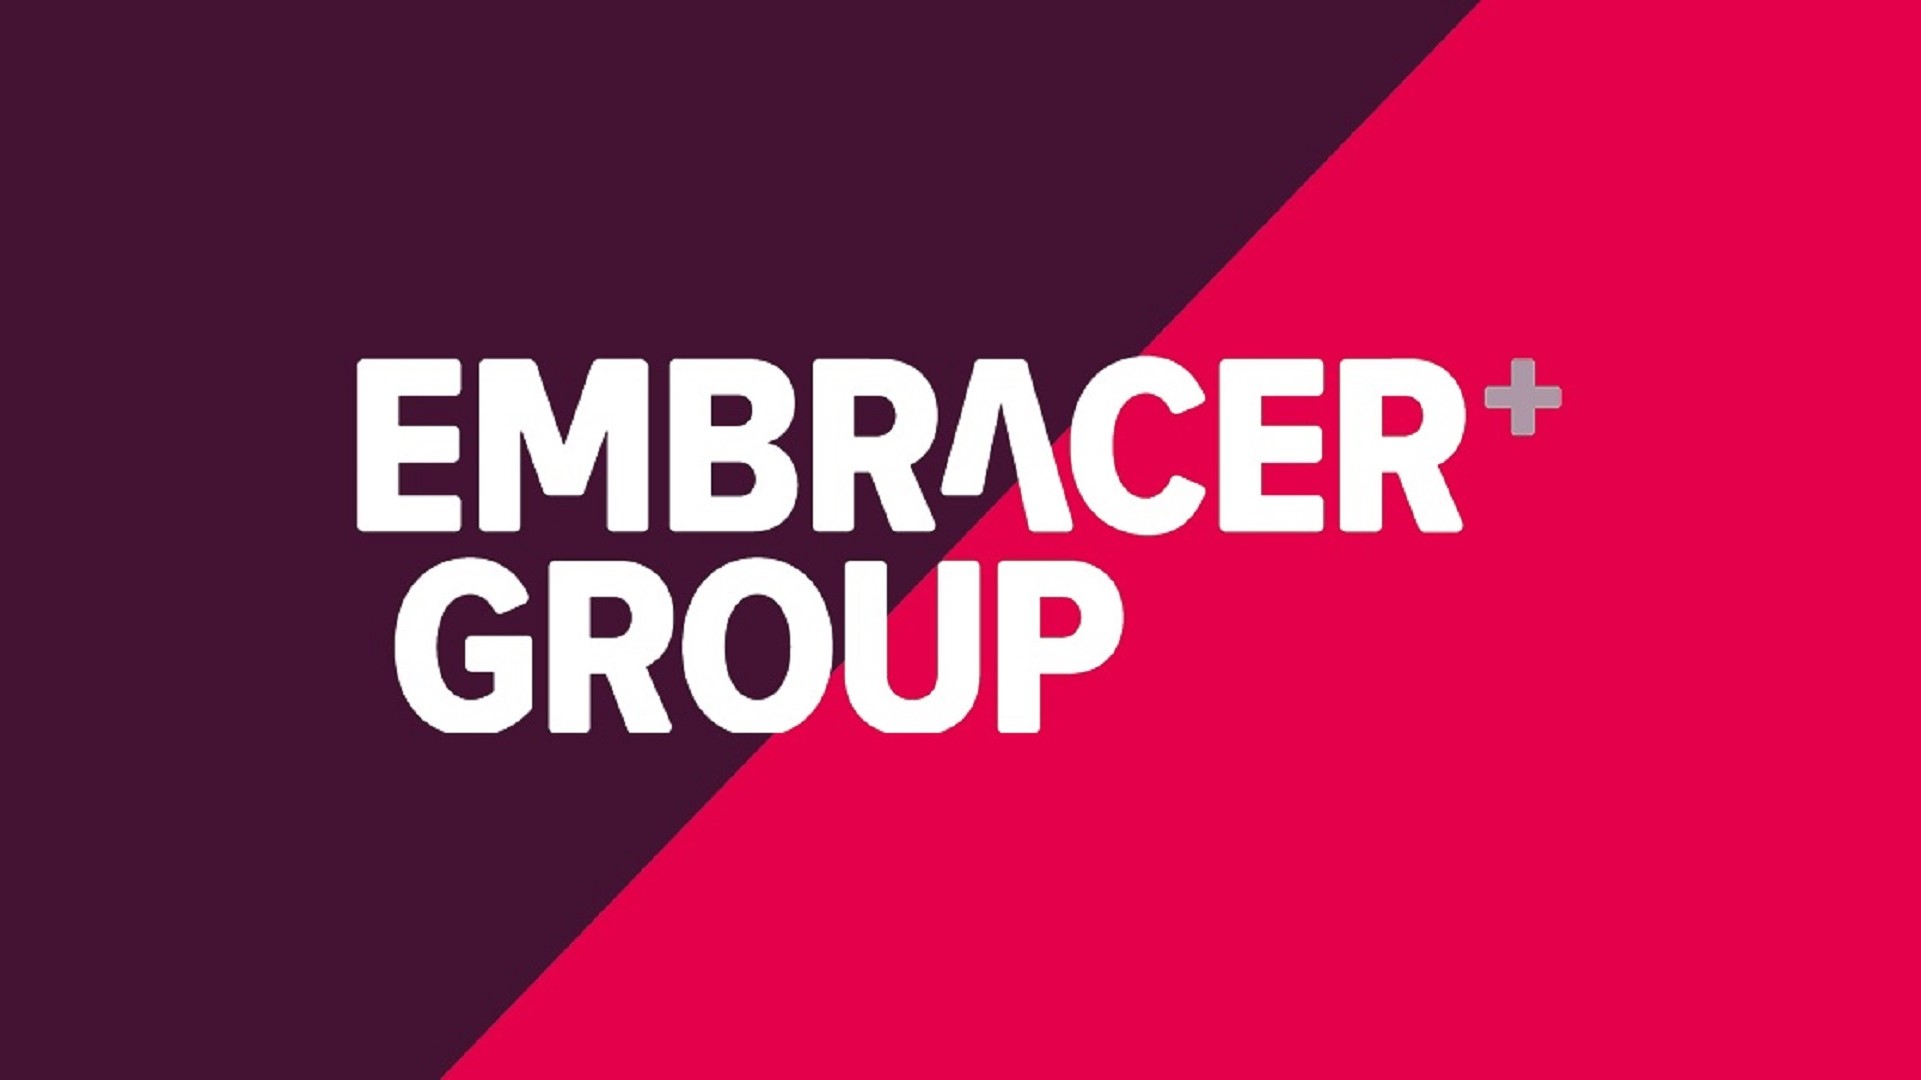 Embracer Group Will be Shuttering Studios and Cancelling Projects as Part of a Restructuring Program